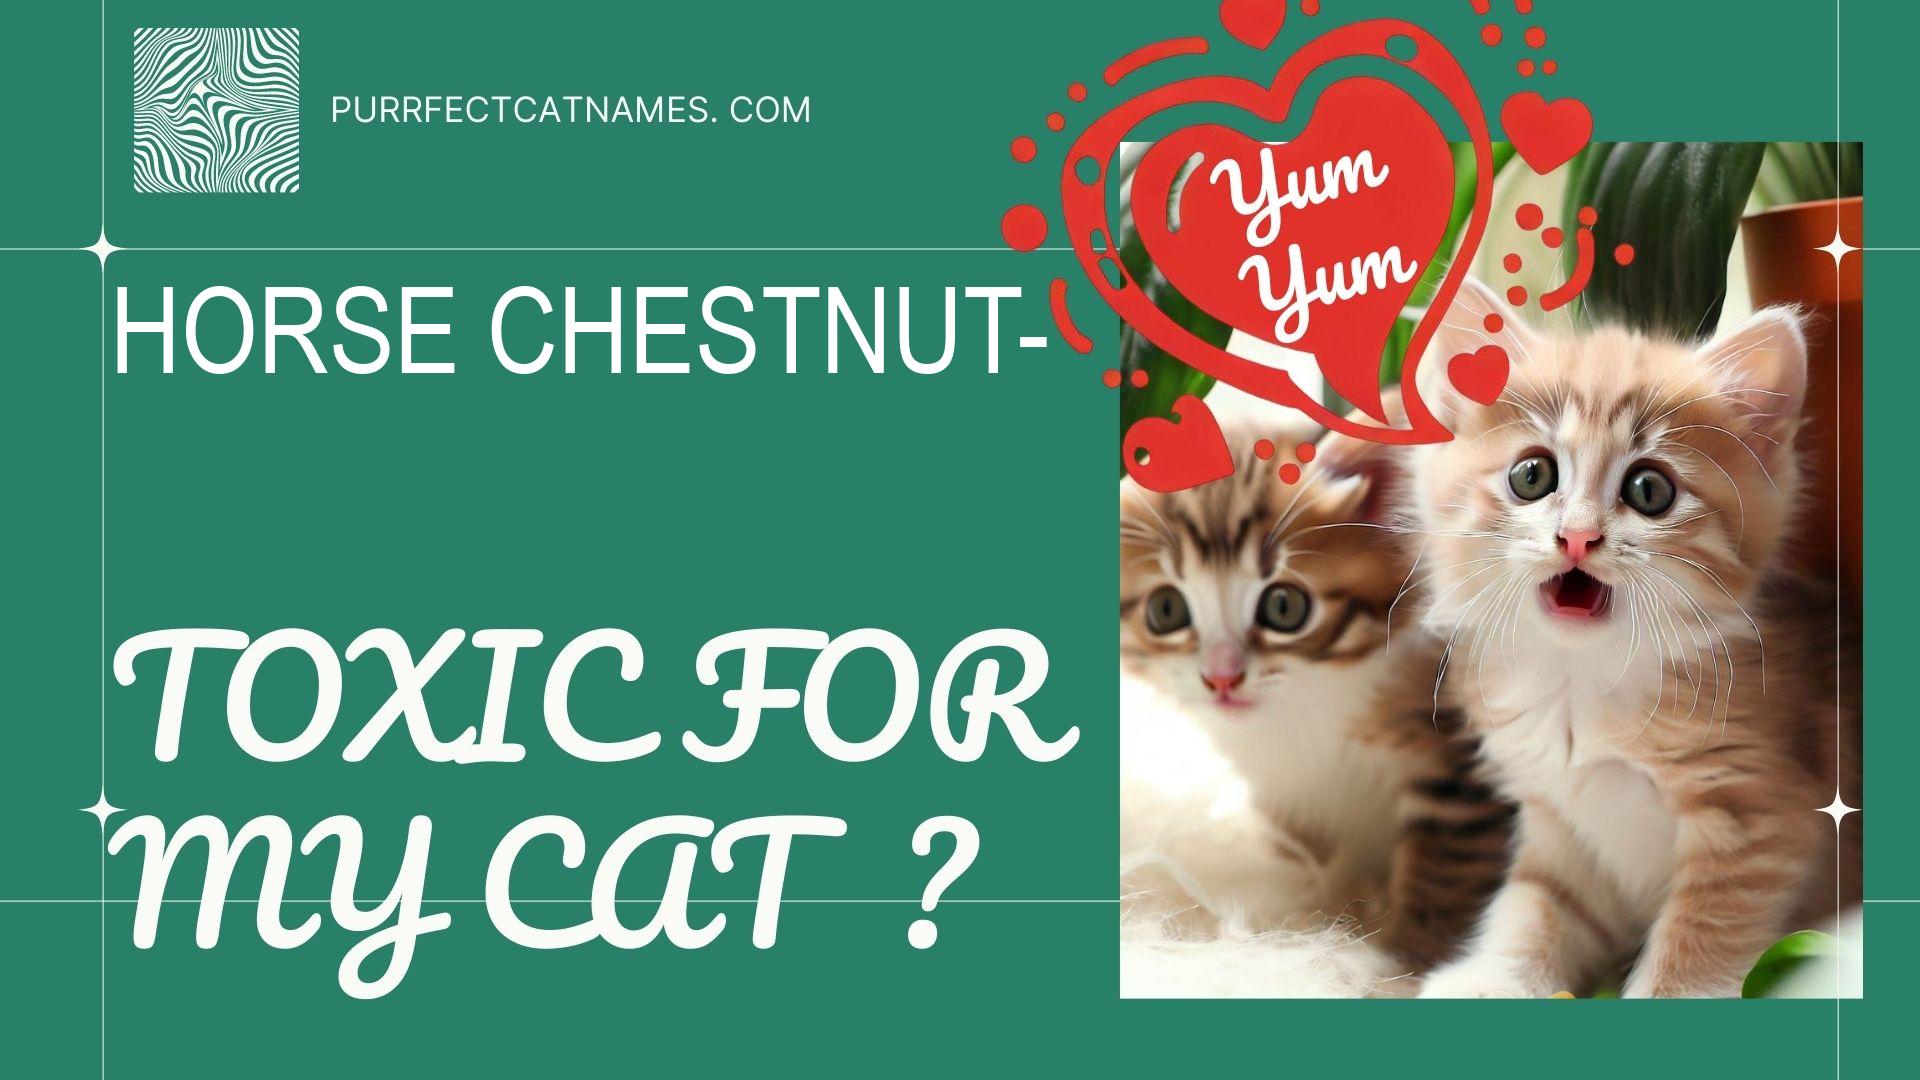 IsHorse Chestnut plant toxic for your cat